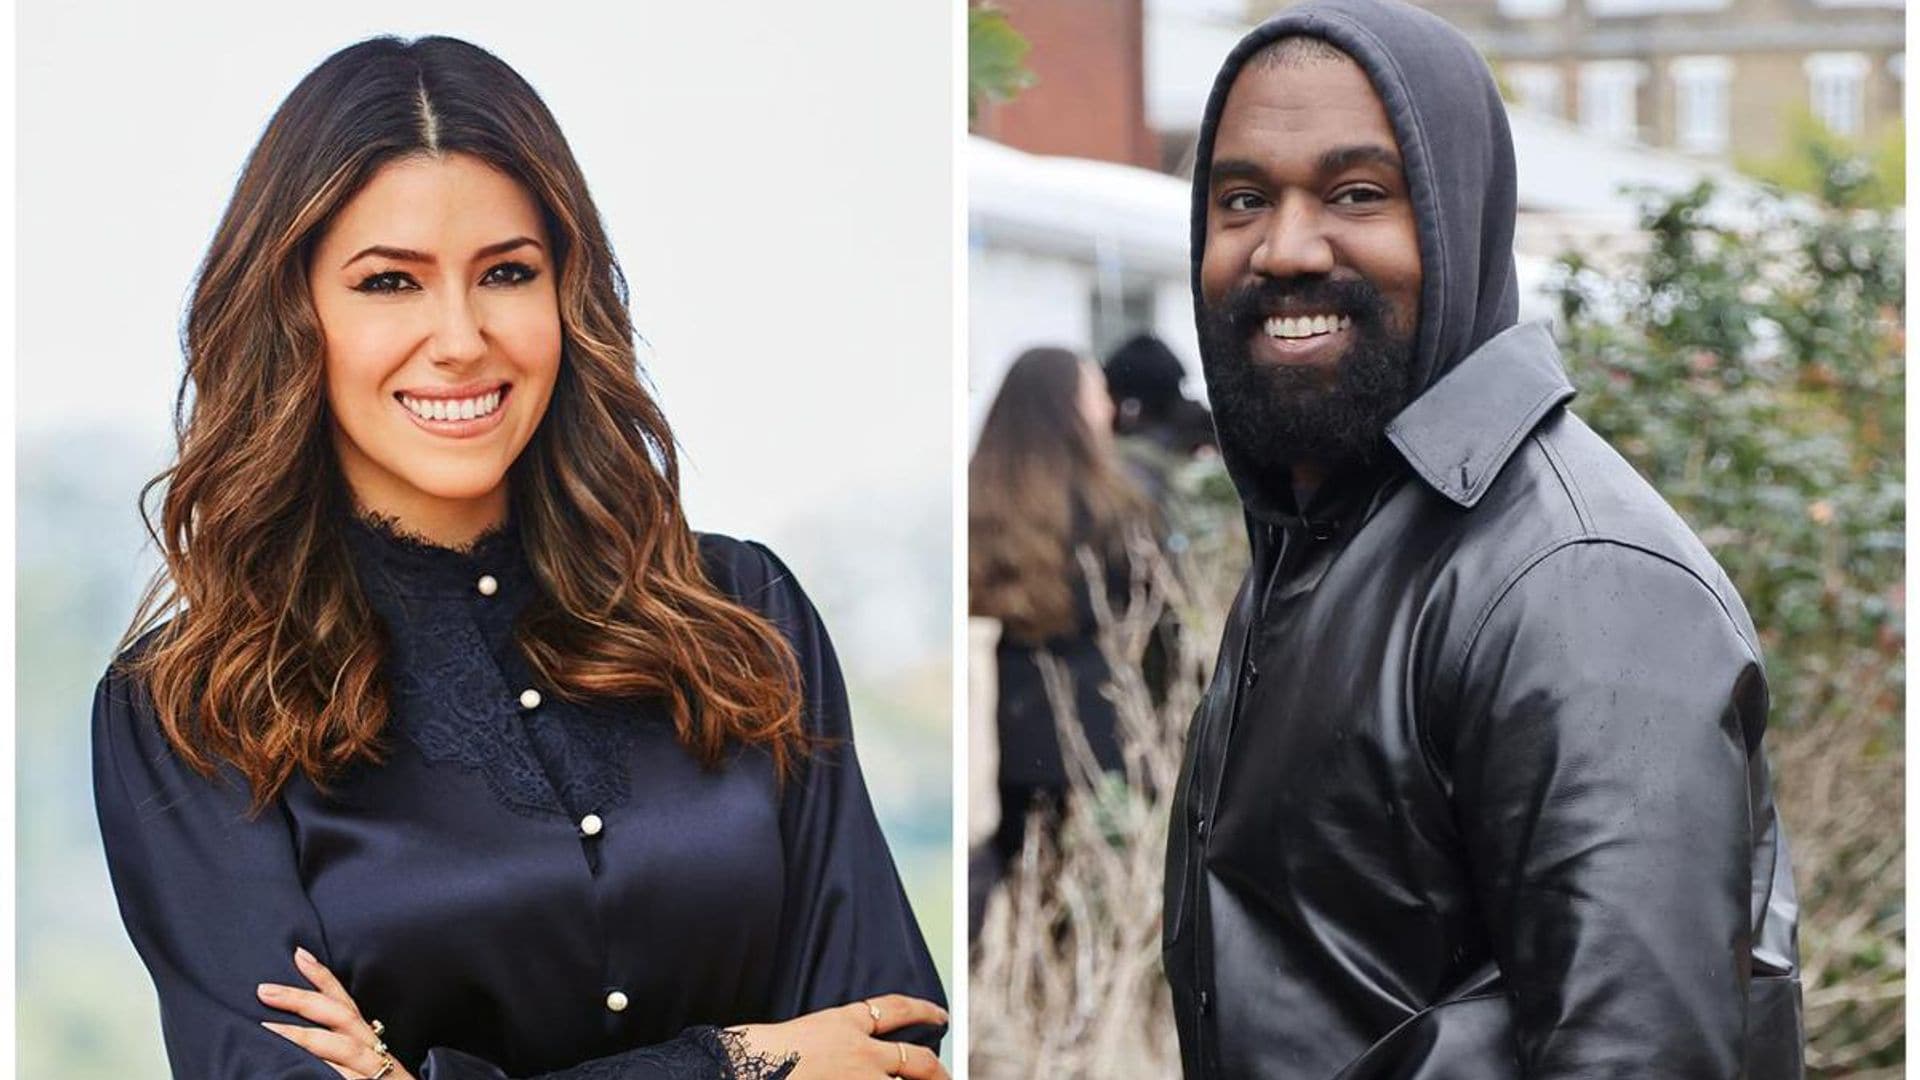 Attorney Camille Vasquez will represent Kanye West in upcoming court cases